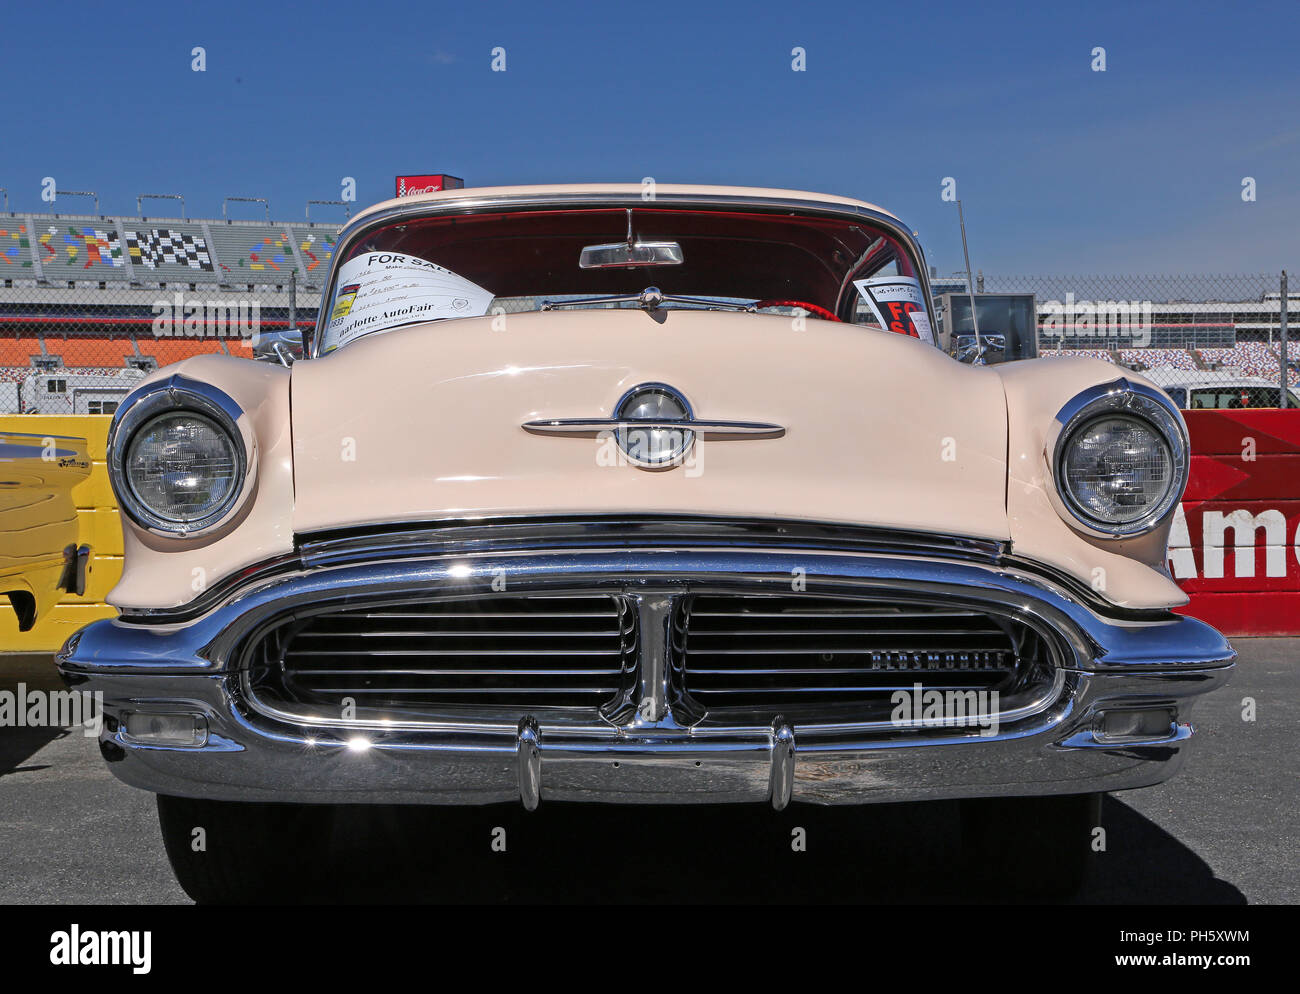 CONCORD, NC — April 8, 2017:  A 1956 Oldsmobile 88 automobile on display at the Pennzoil AutoFair classic car show held at Charlotte Motor Speedway. Stock Photo